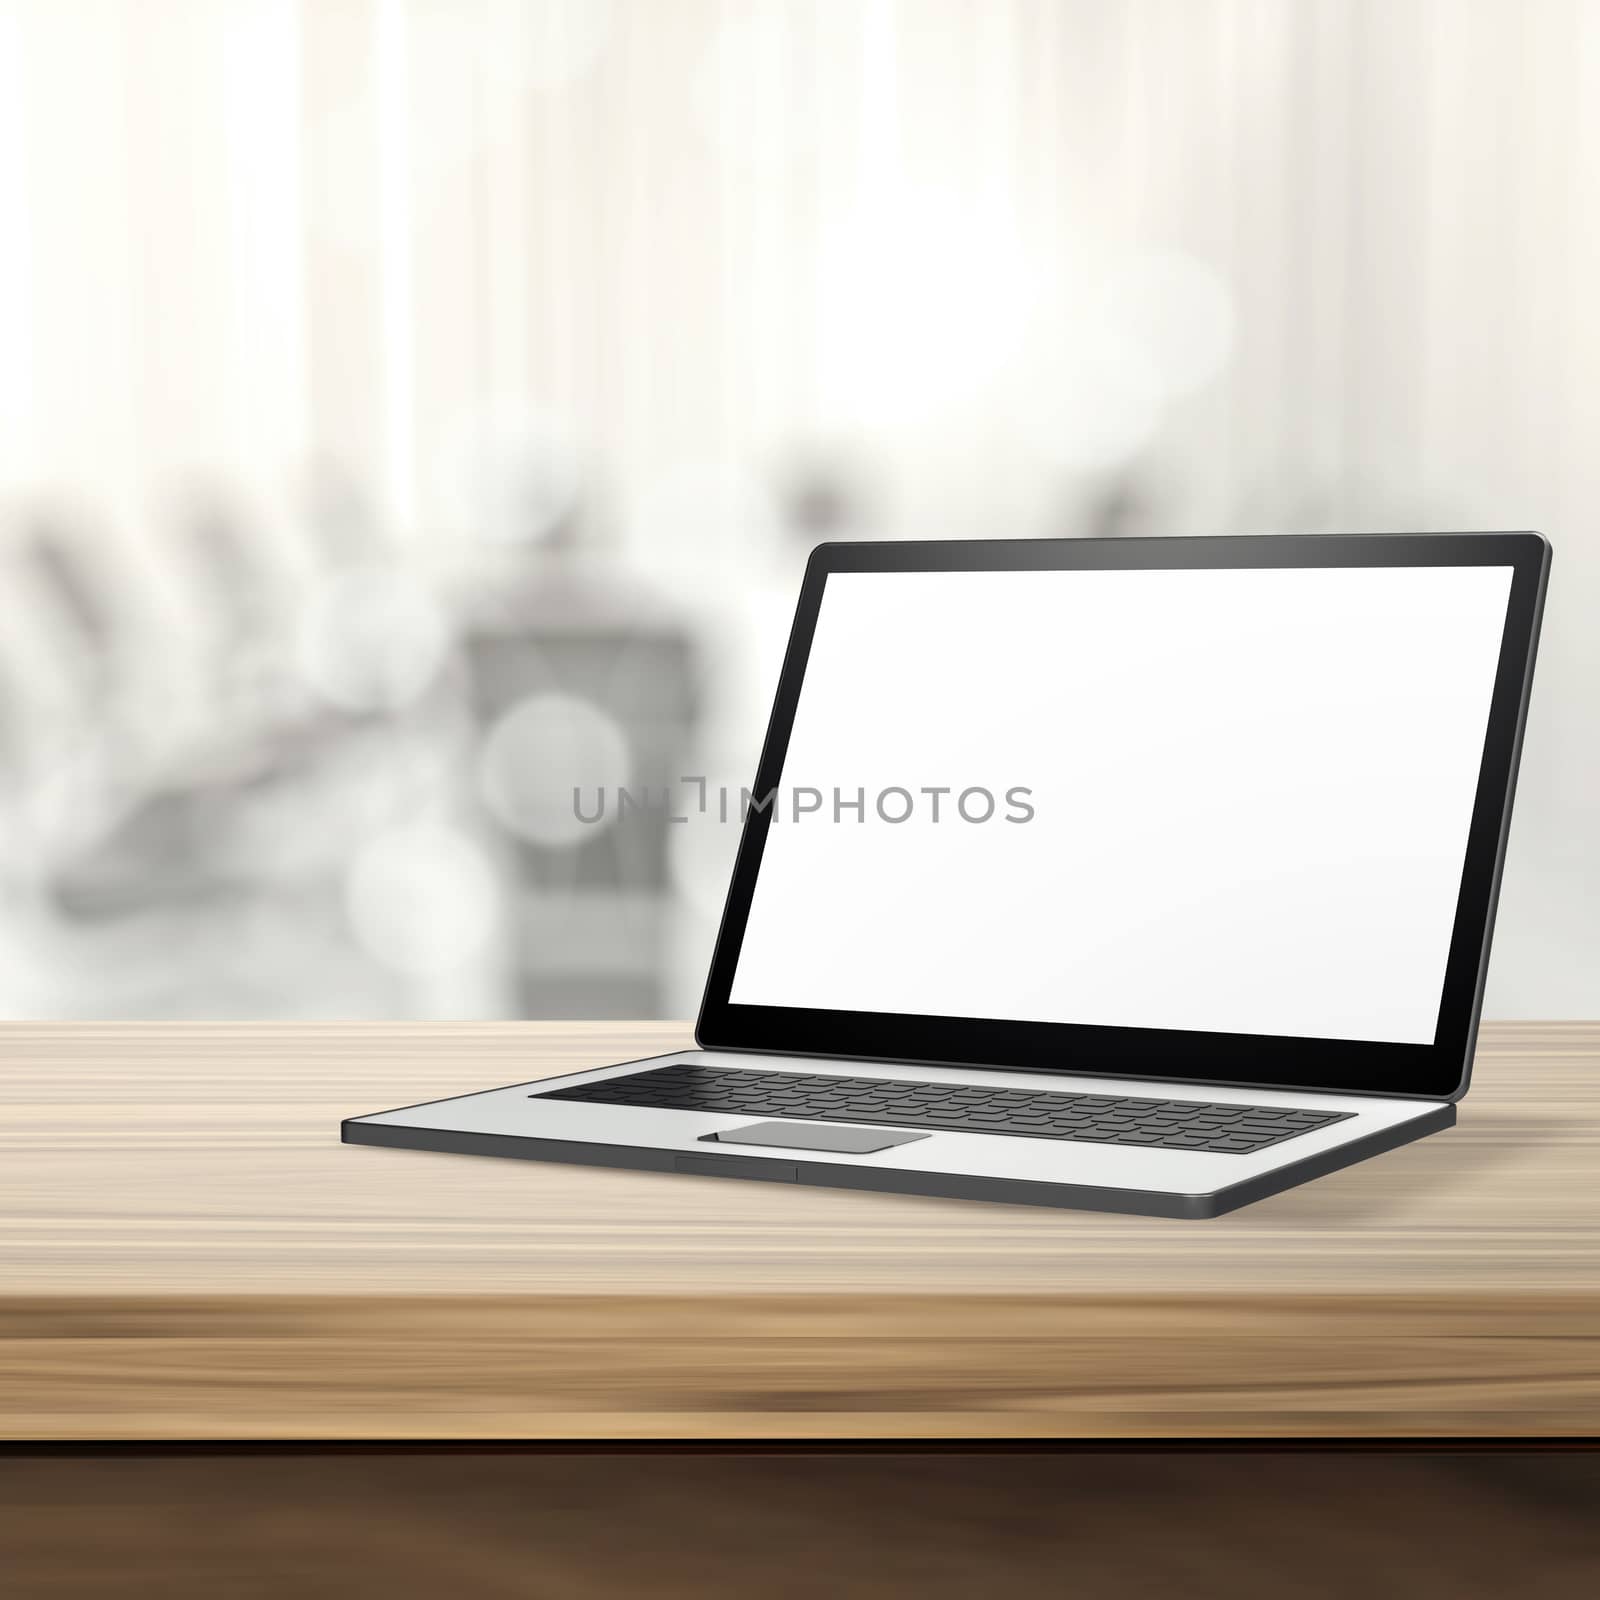 Laptop with blank screen on wood table and blurred background